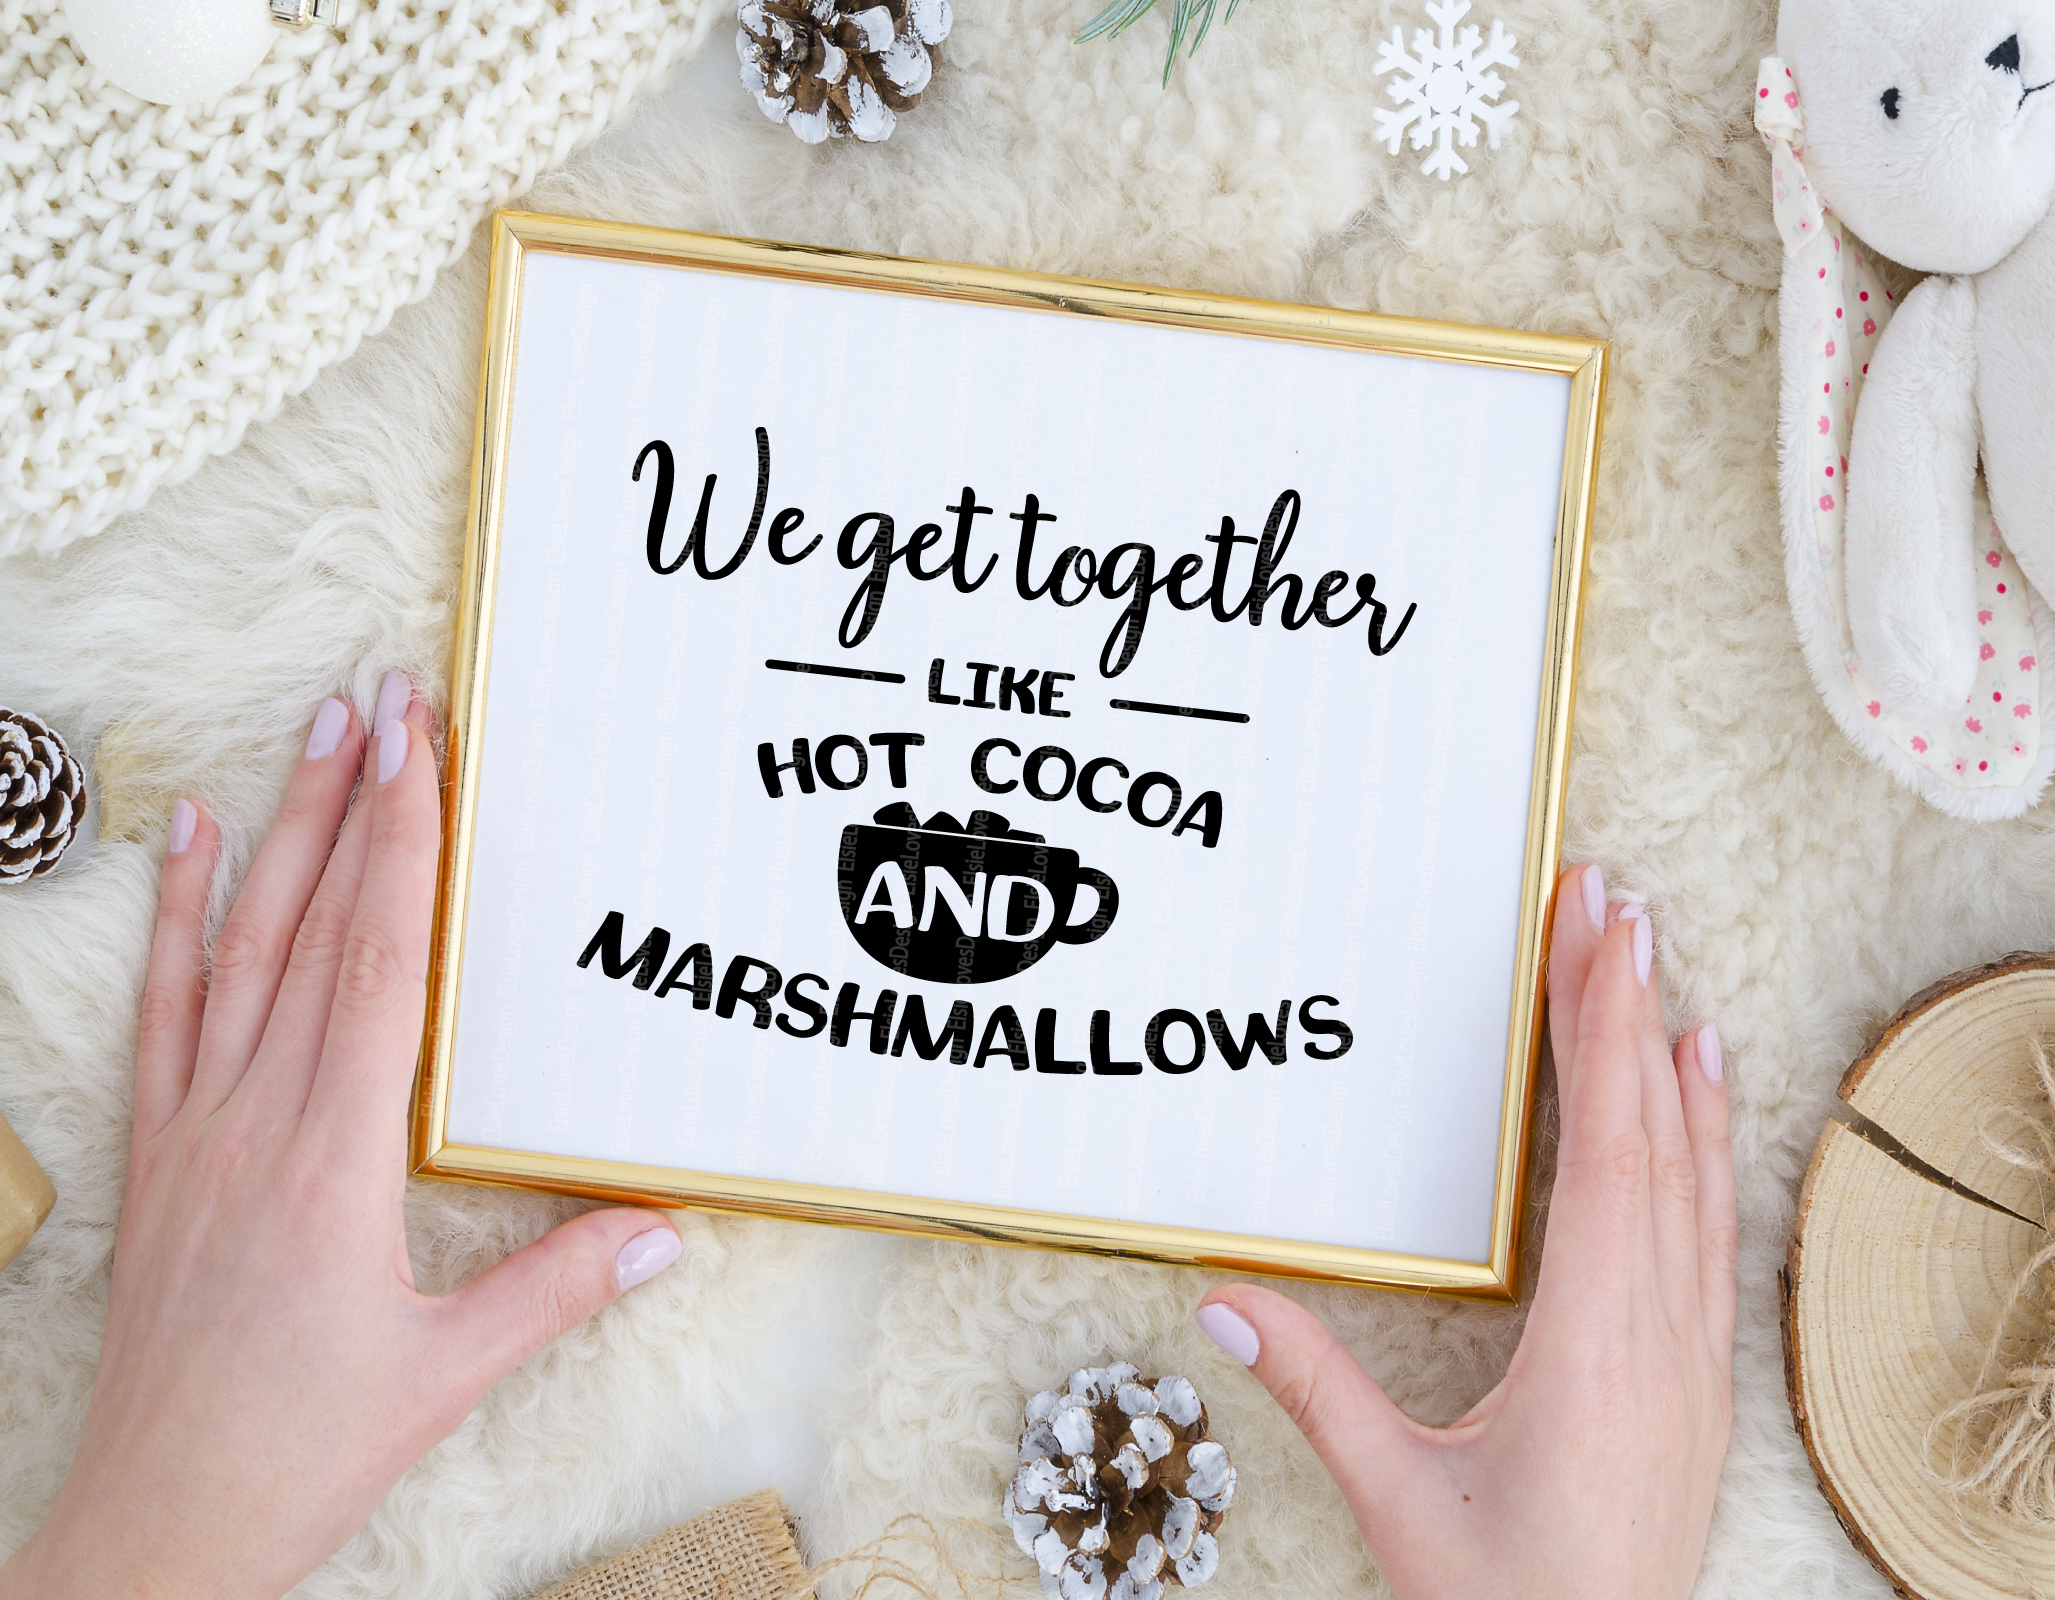 We Get Together Like Hot Cocoa And Marshmallows Svg By Elsielovesdesign Thehungryjpeg Com